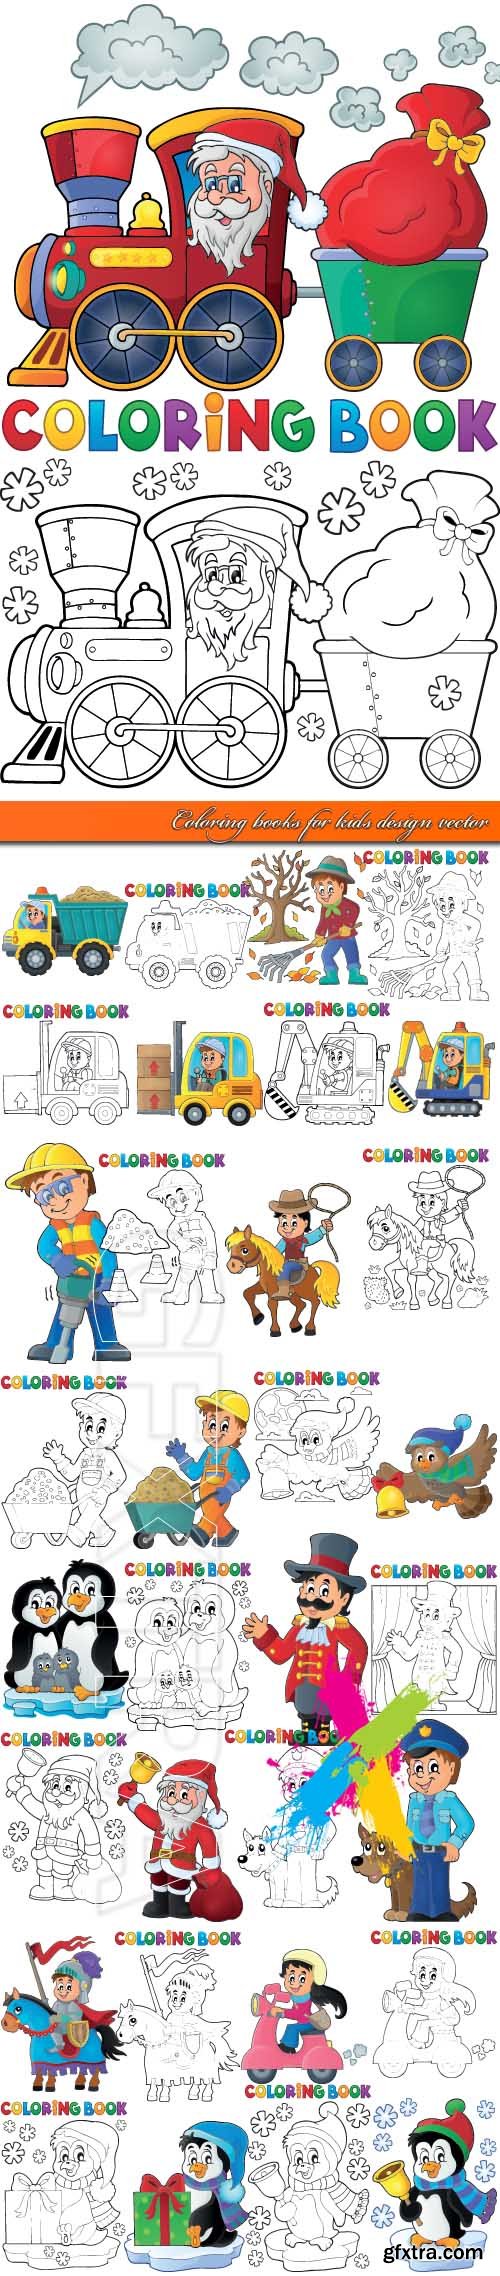 Coloring books for kids design vector